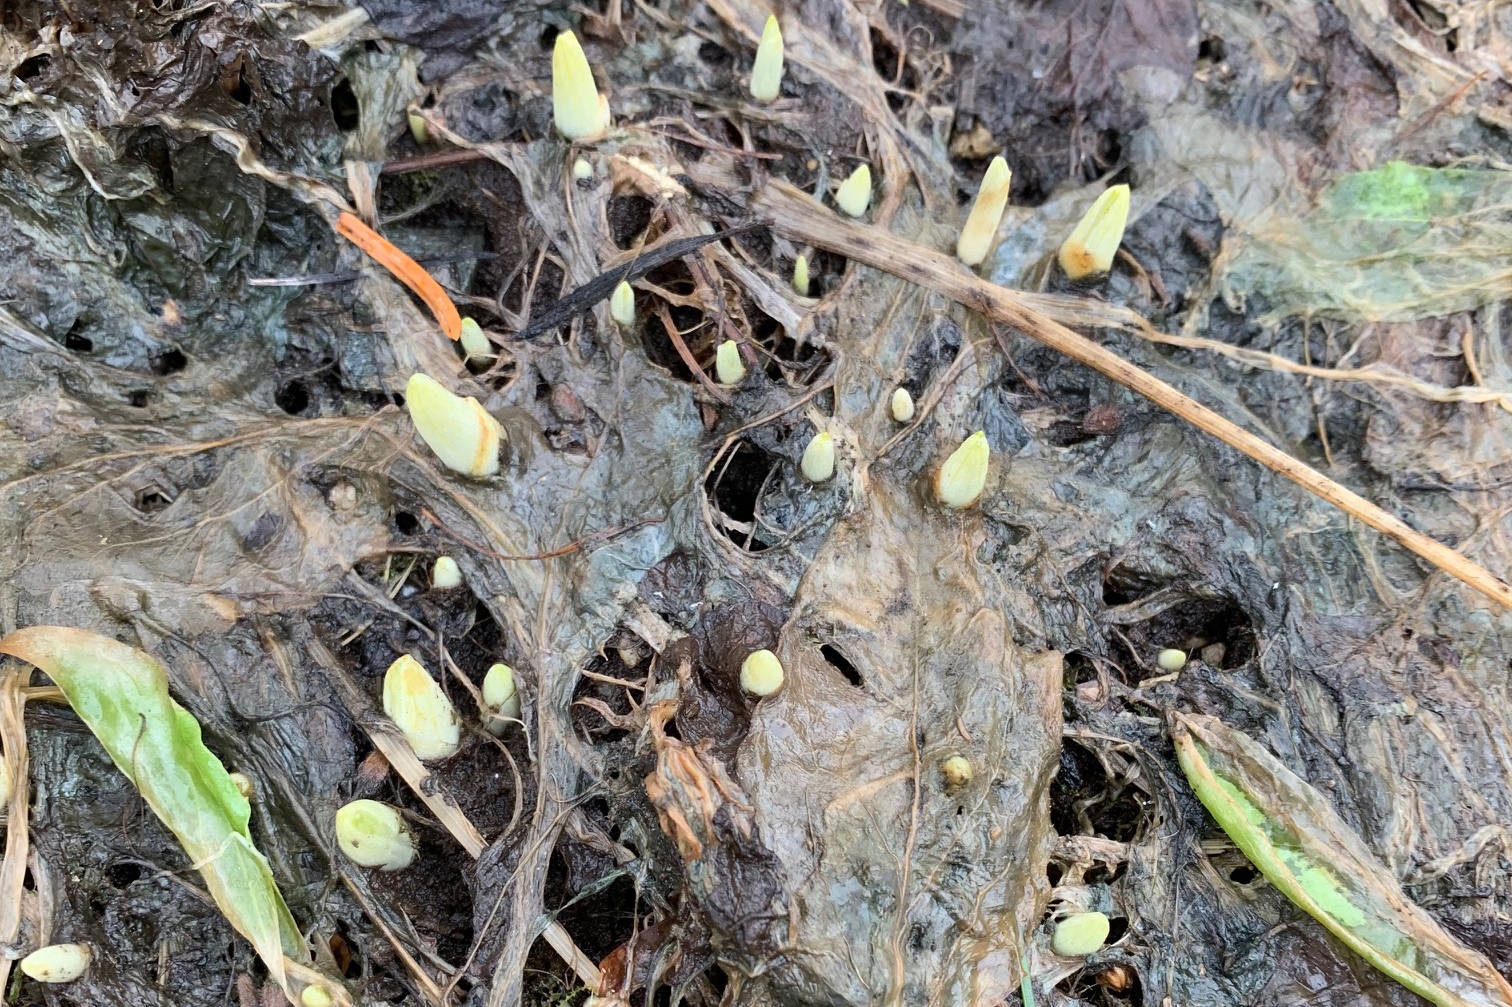 “This may not be the most colorful photo, but I hope the promise of crocus breaking ground and seeking their destiny will cradle your soul and warm your heart,” the Kachemak Gardener writes of crocus emerging at her garden on March 8, 2019, in Homer, Alaska. (Photo by Rosemary Fitzpatrick/Homer News)